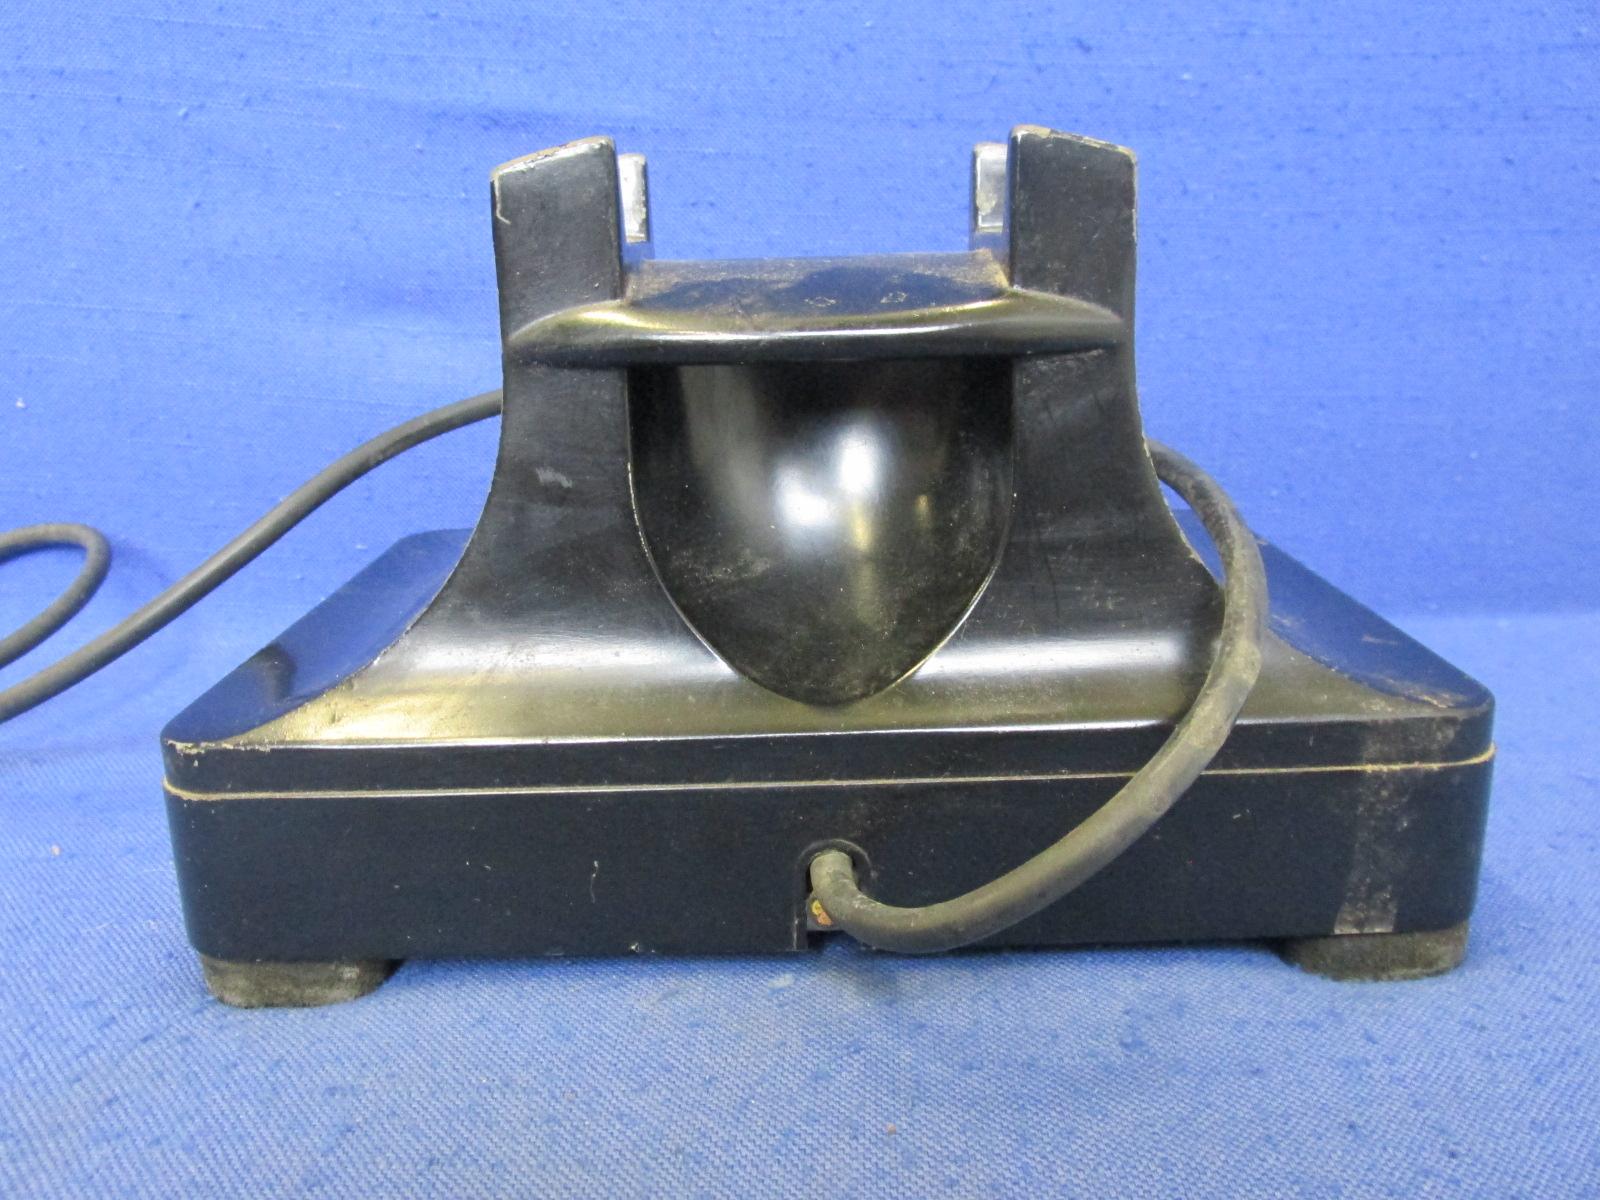 Vintage - Rotary Dial Desk Telephone – North Electric Mfg Galon, Ohio – 5 1/4”H x 7 1/2”W x 5 14”D –